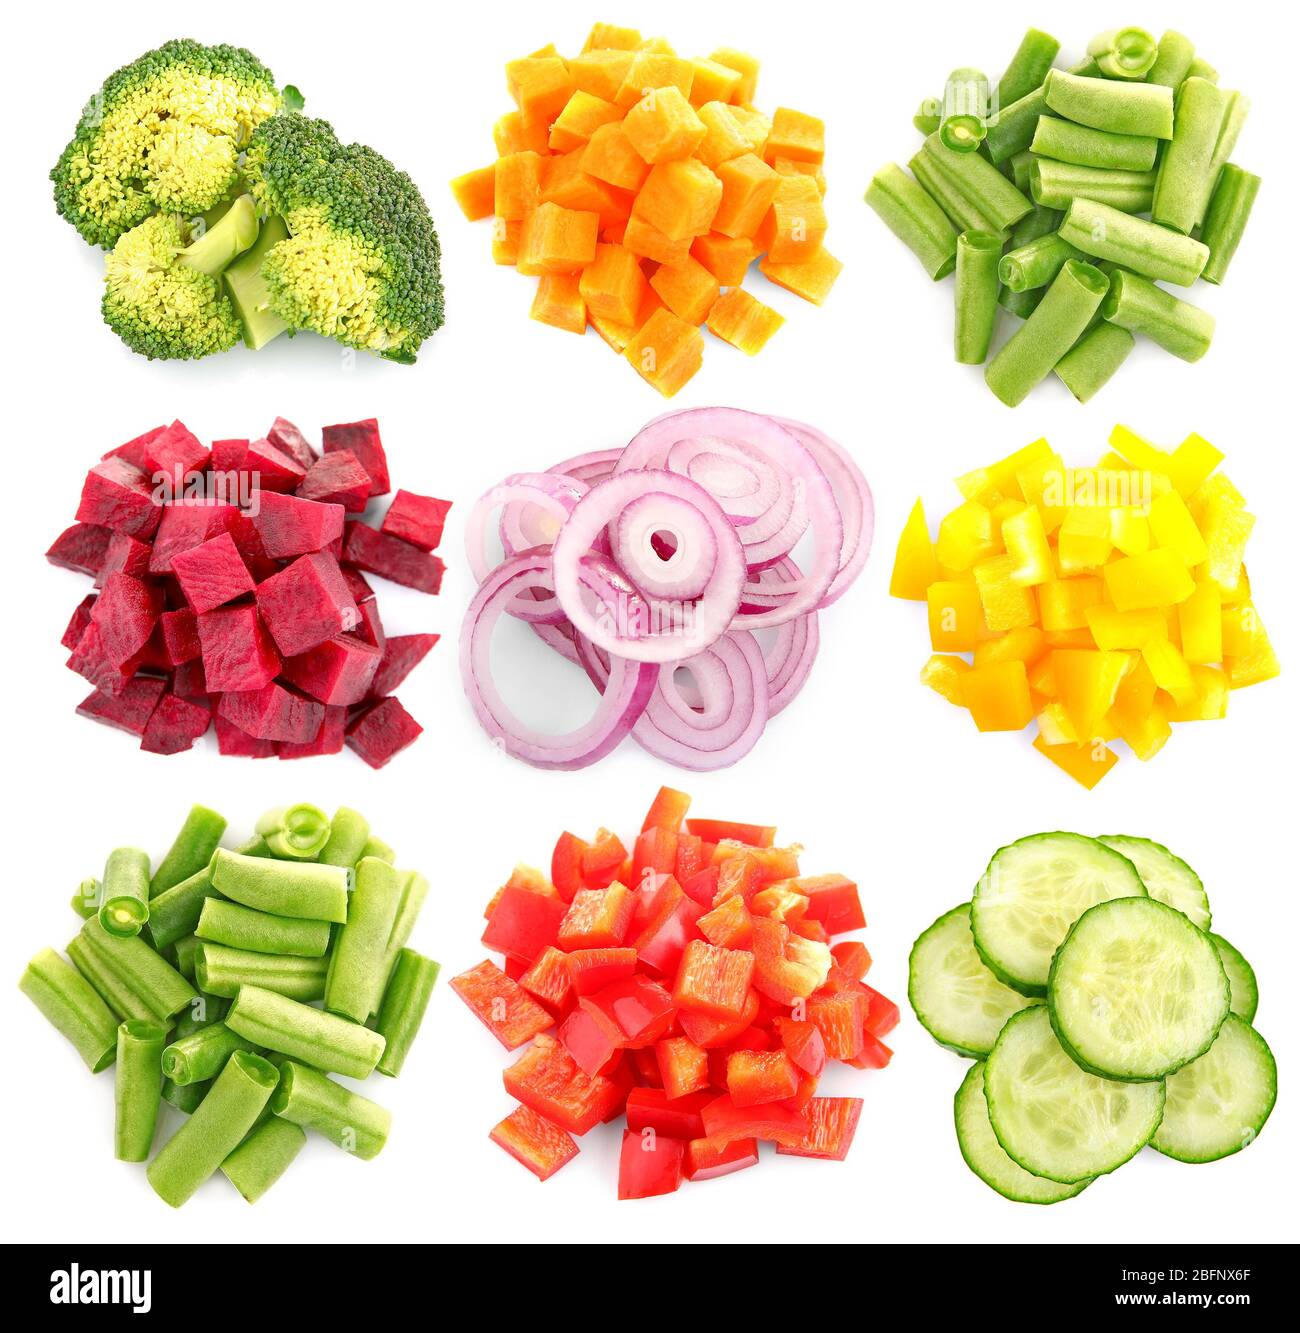 Variety of chopped vegetables on white background Stock Photo